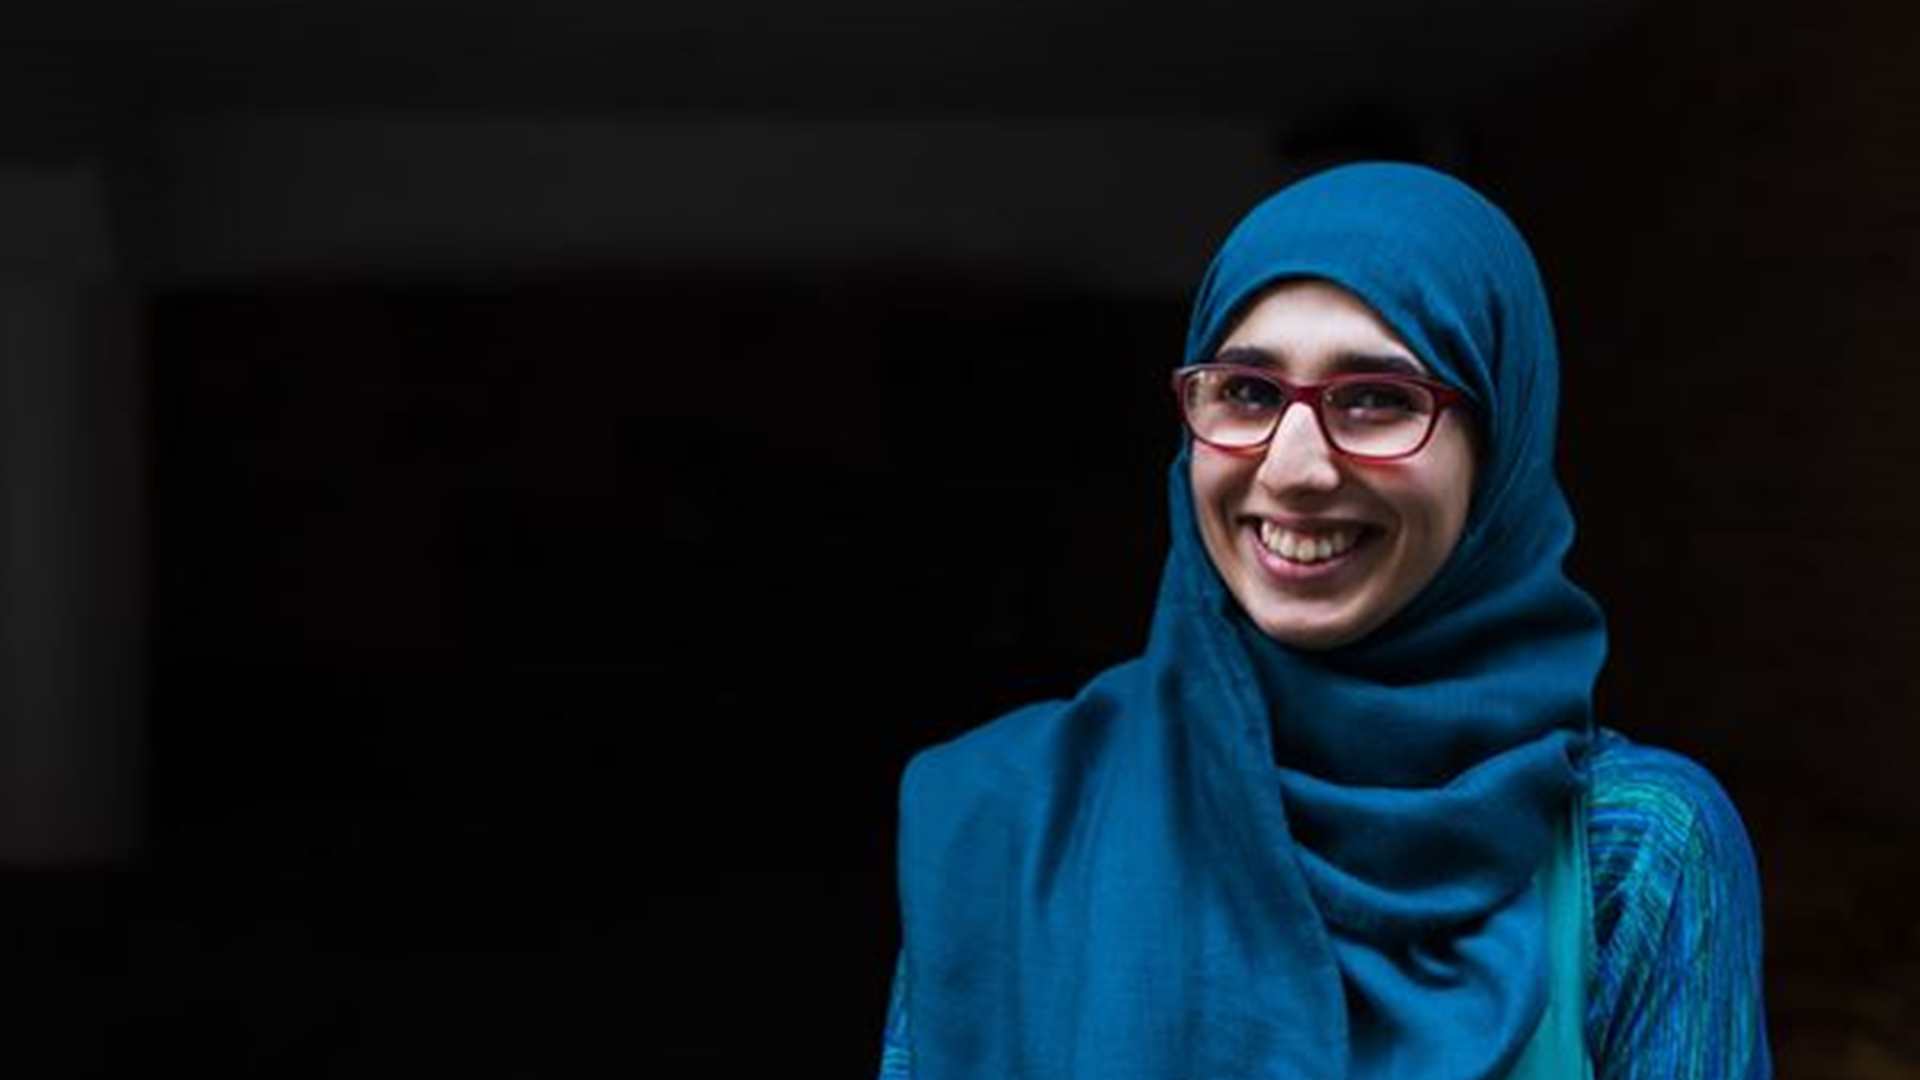 A young woman smiling and wearing a blue hijab and glasses.